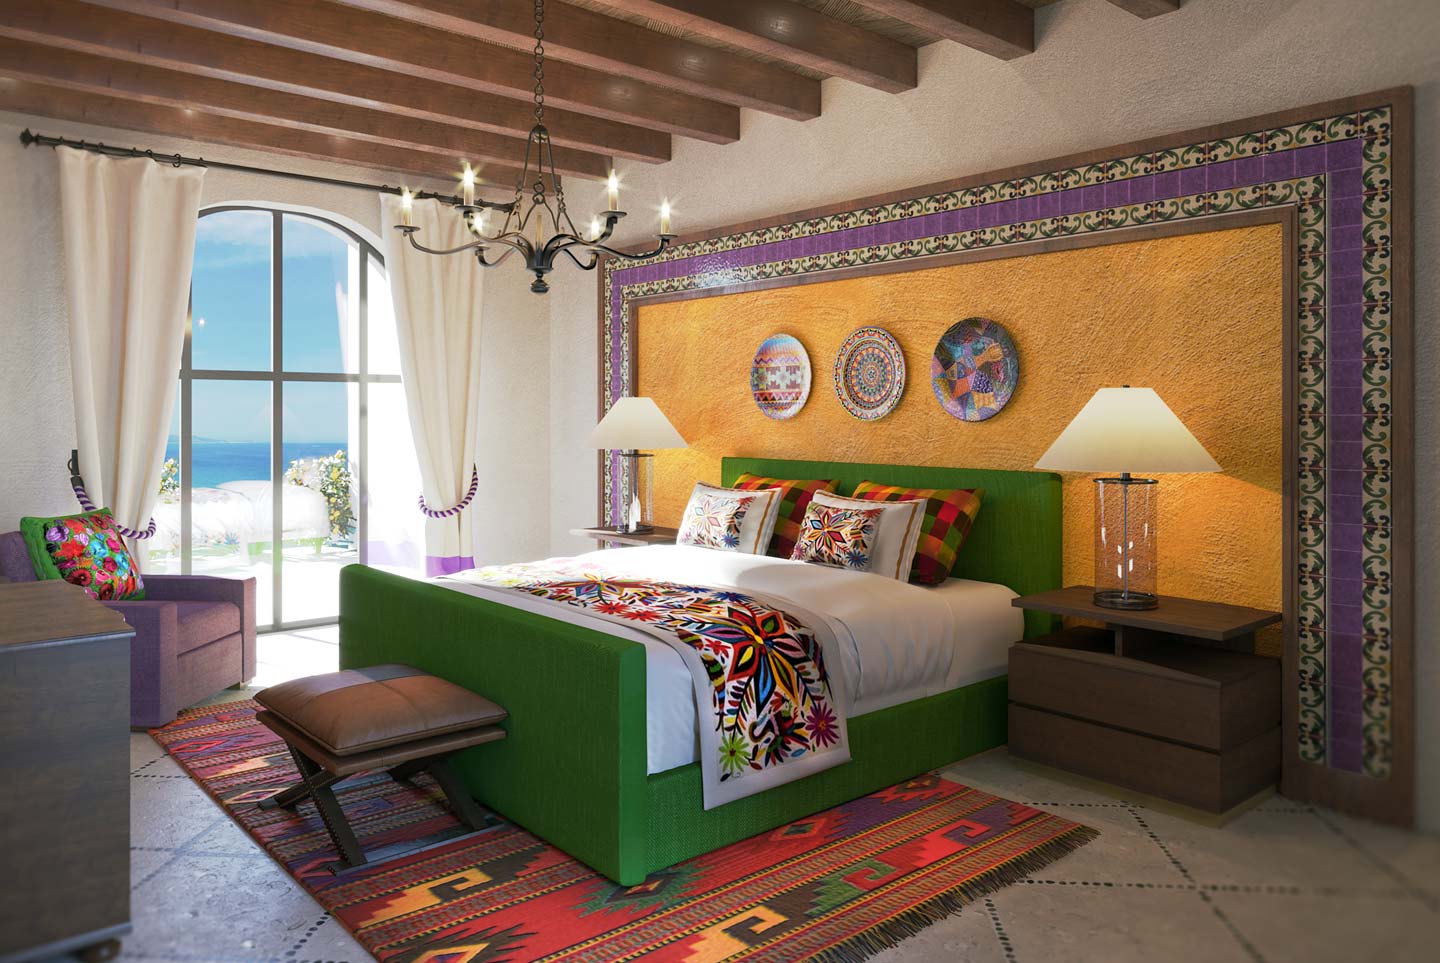 One of the bedrooms of La Datcha, with a green bedframe bed and beach views from the large windows.